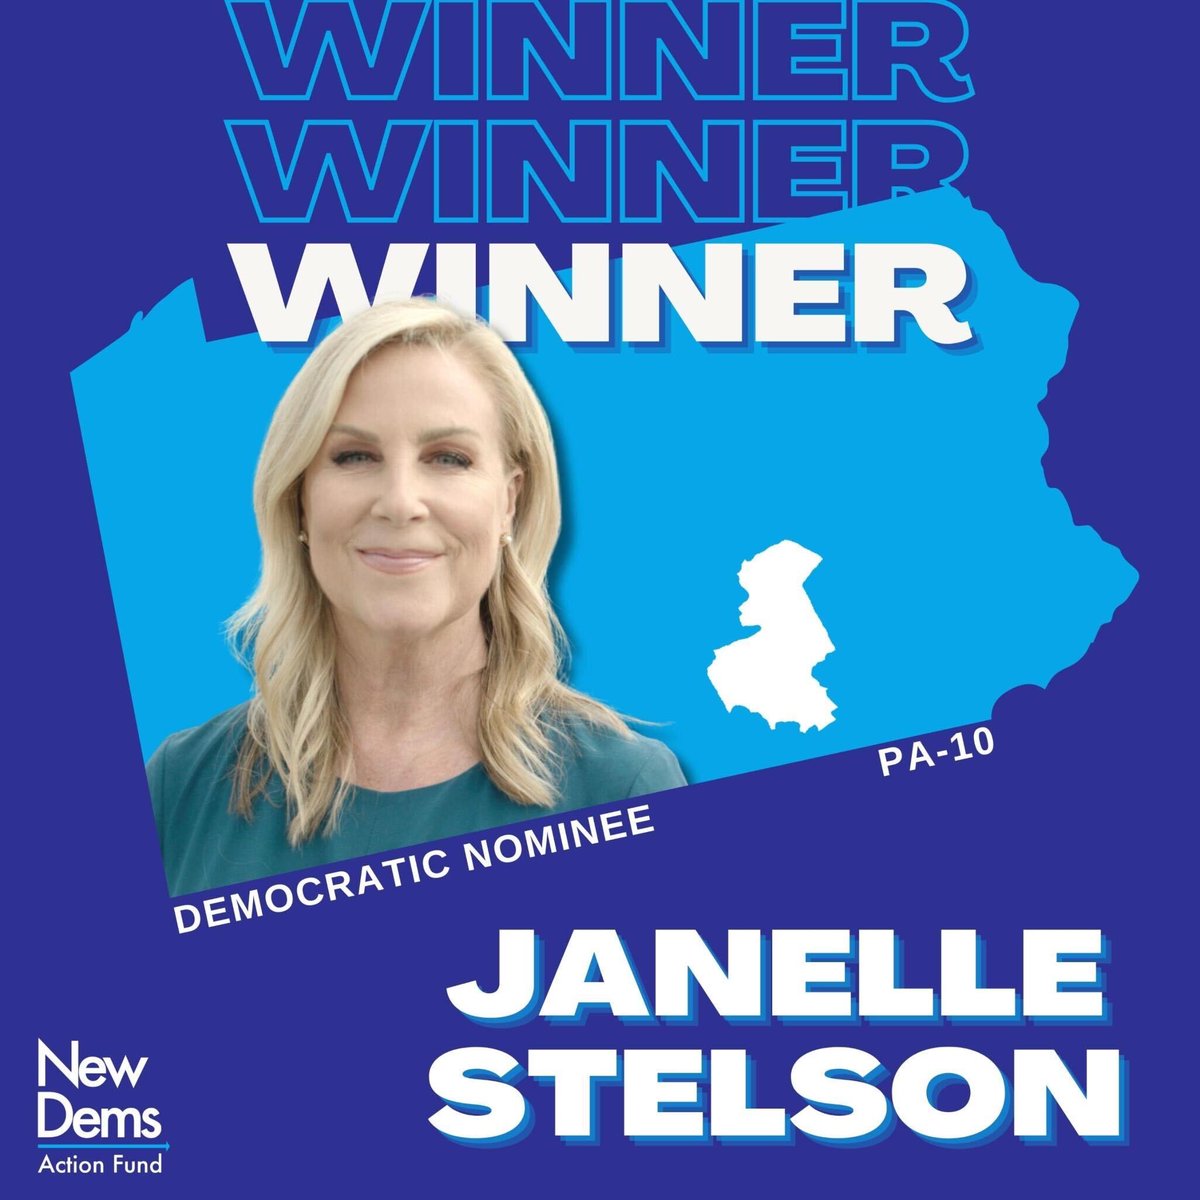 Congratulations to NewDem candidate @JanelleStelson for winning a crowded primary in #PA10! Janelle is the candidate best positioned to take on GOP extremist Rep. Scott Perry in November. Let’s flip this seat!